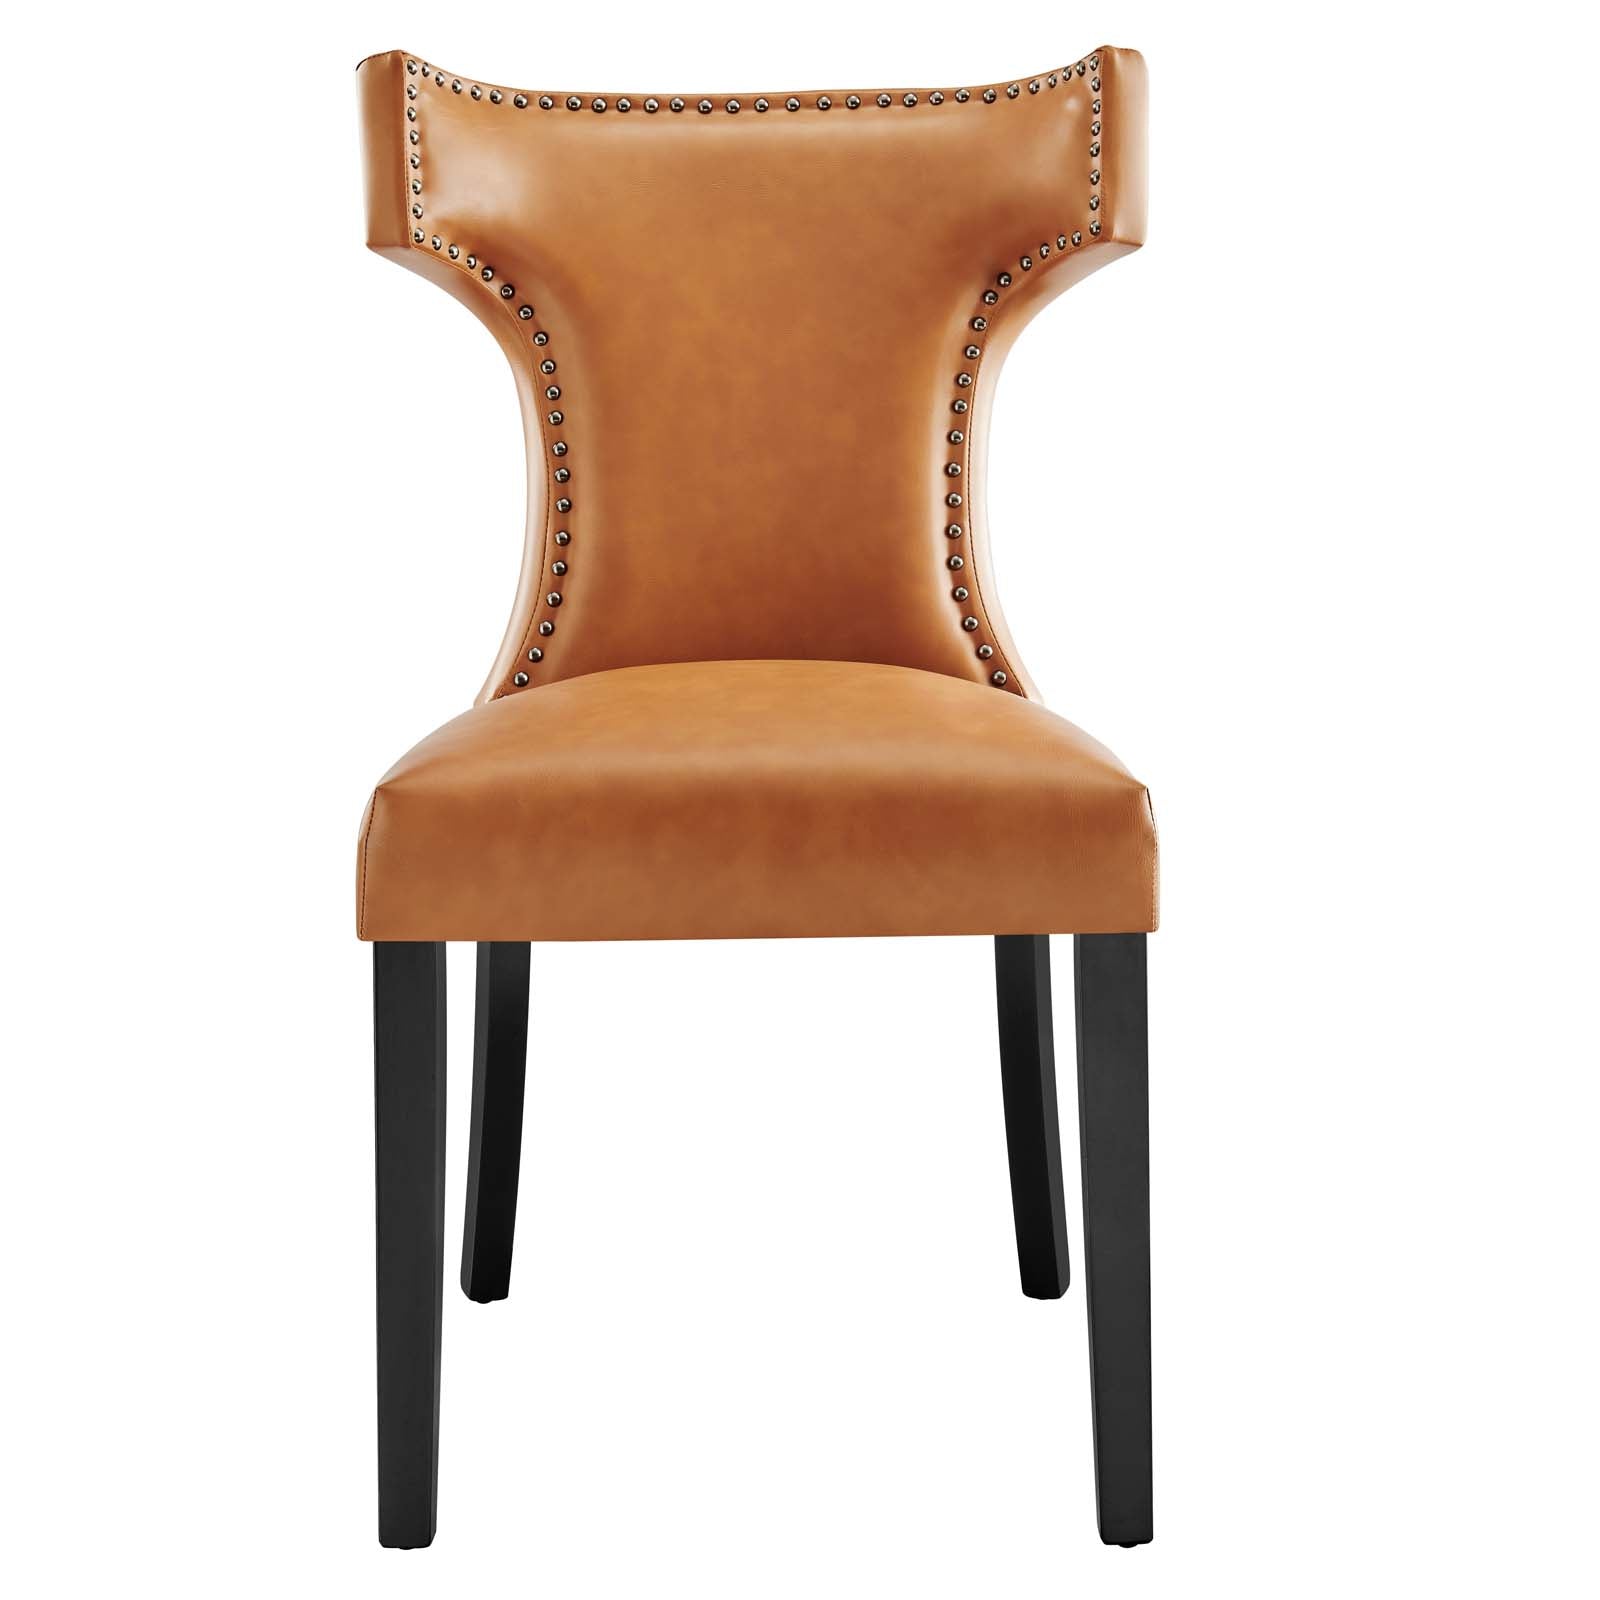 Curve Vegan Leather Dining Chair - East Shore Modern Home Furnishings